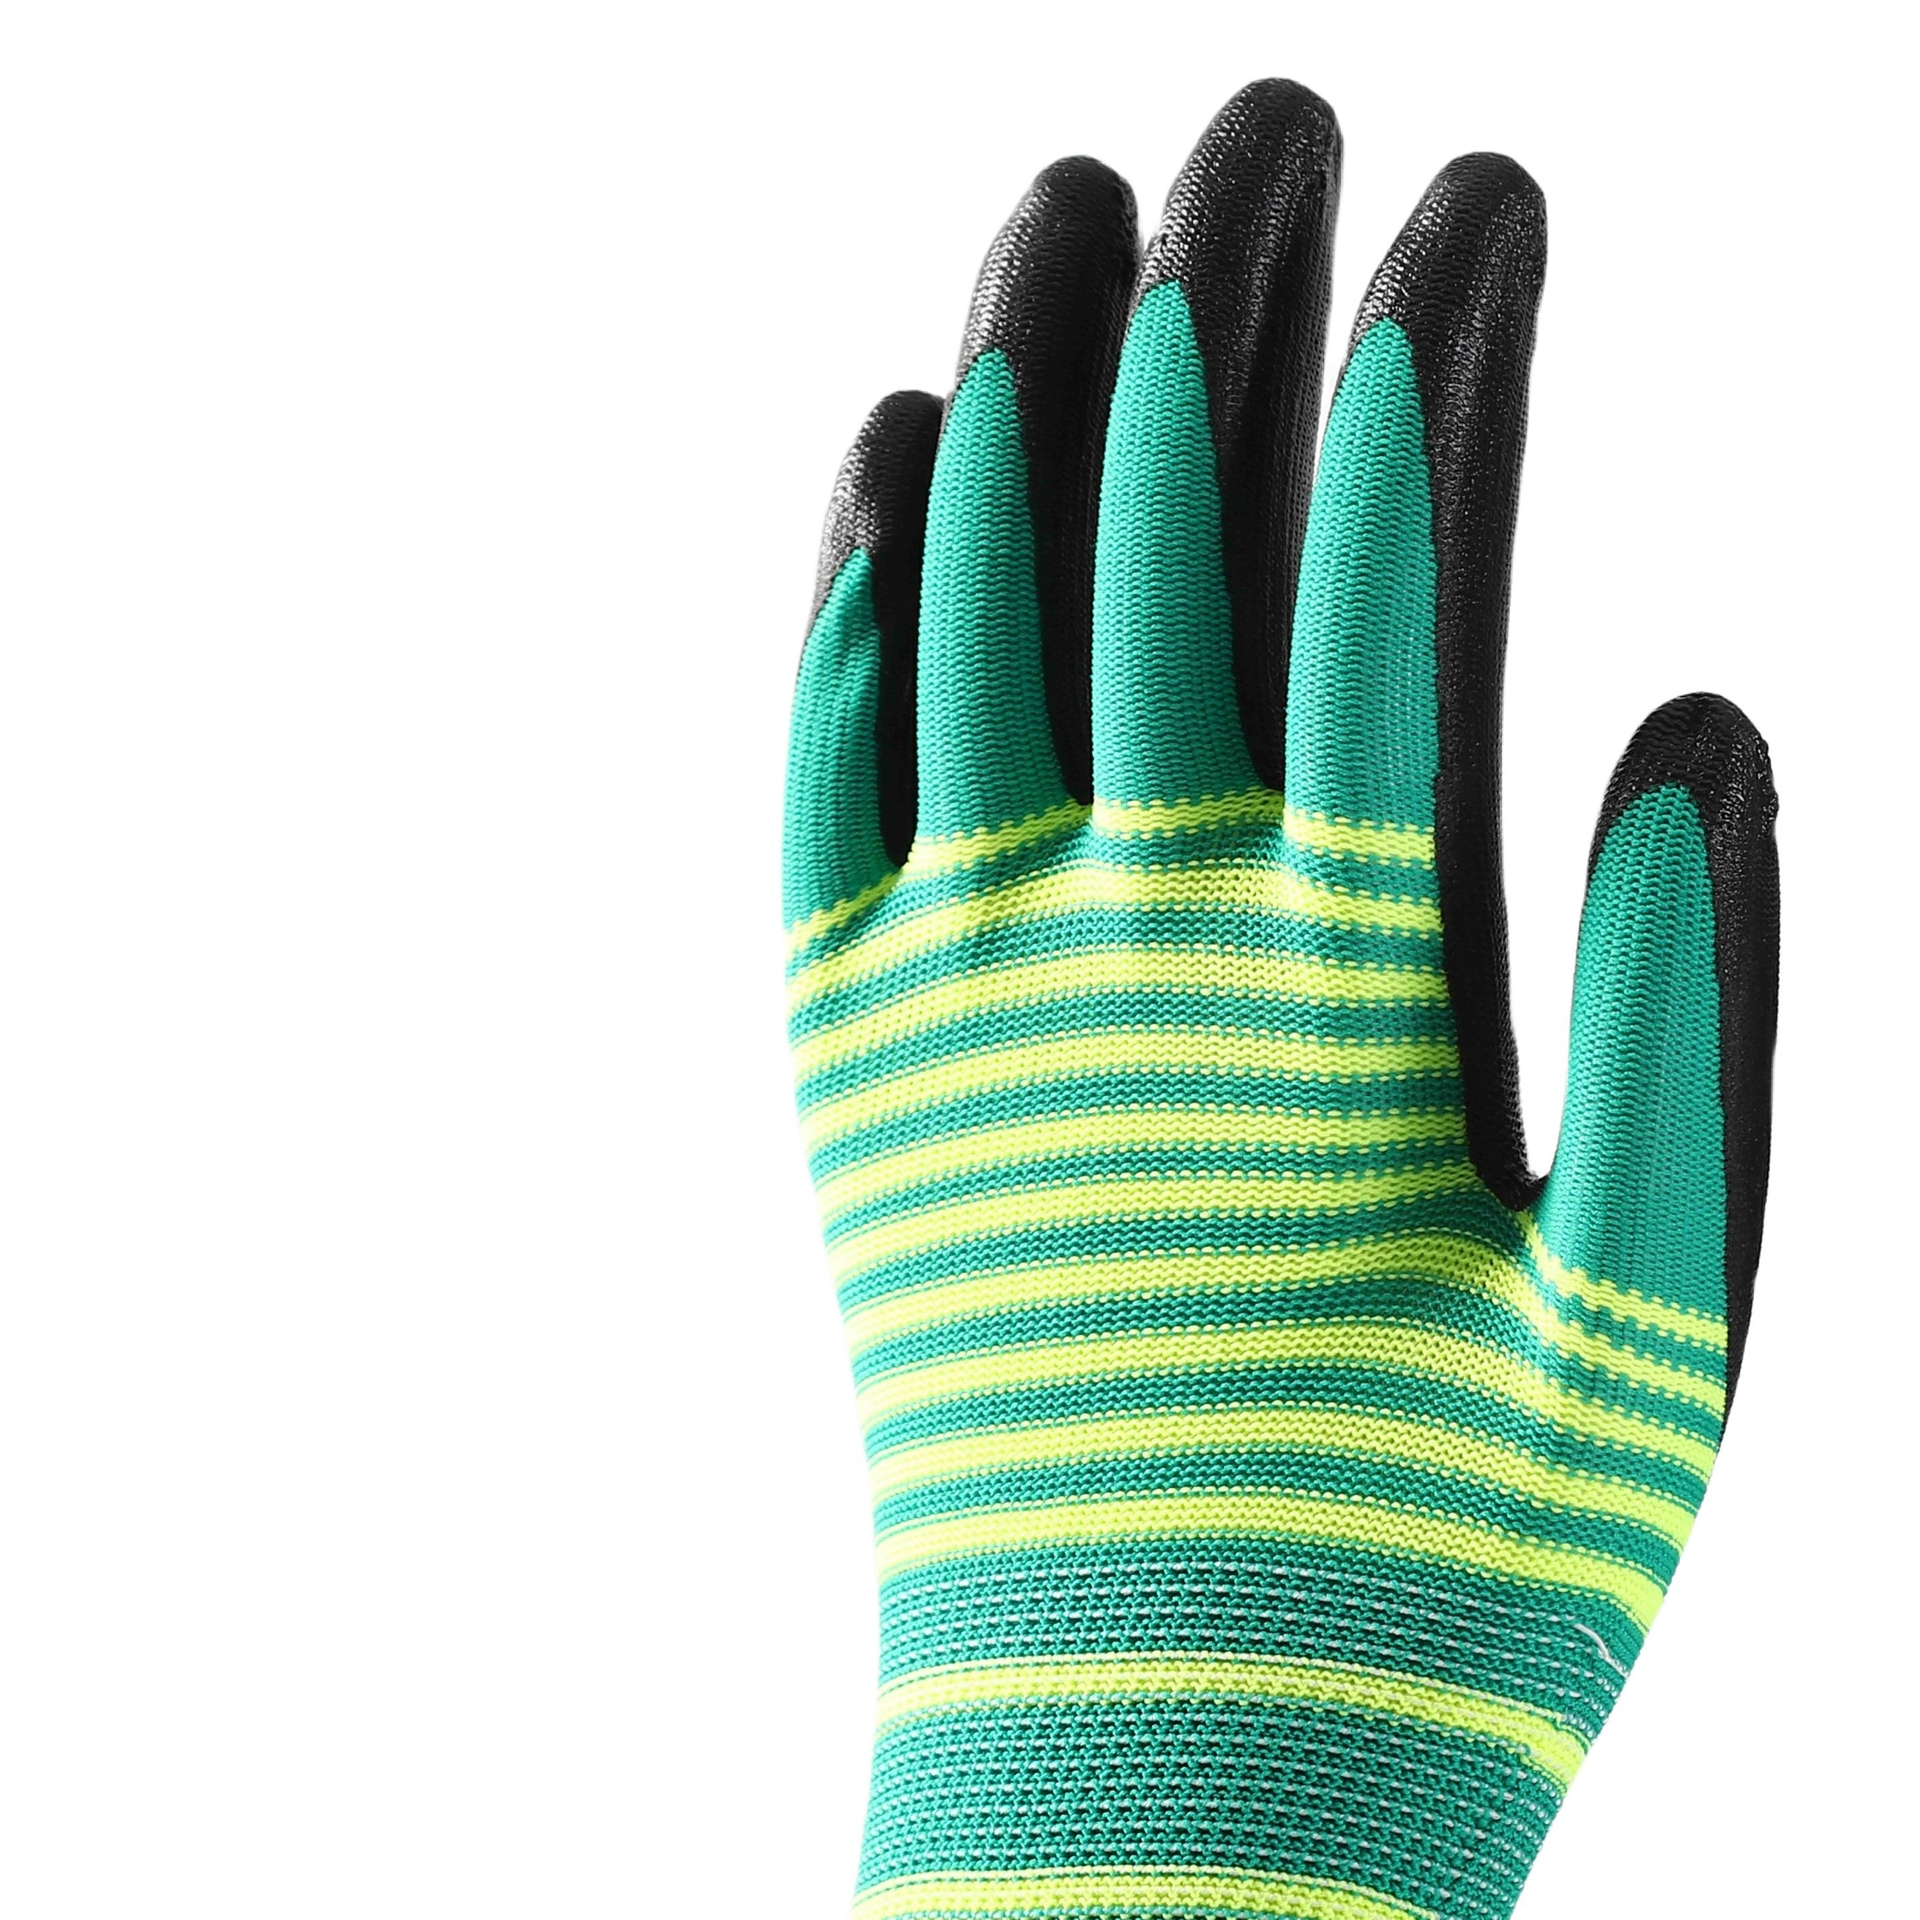                 Pattern polyester with black nitrile coating gloves            